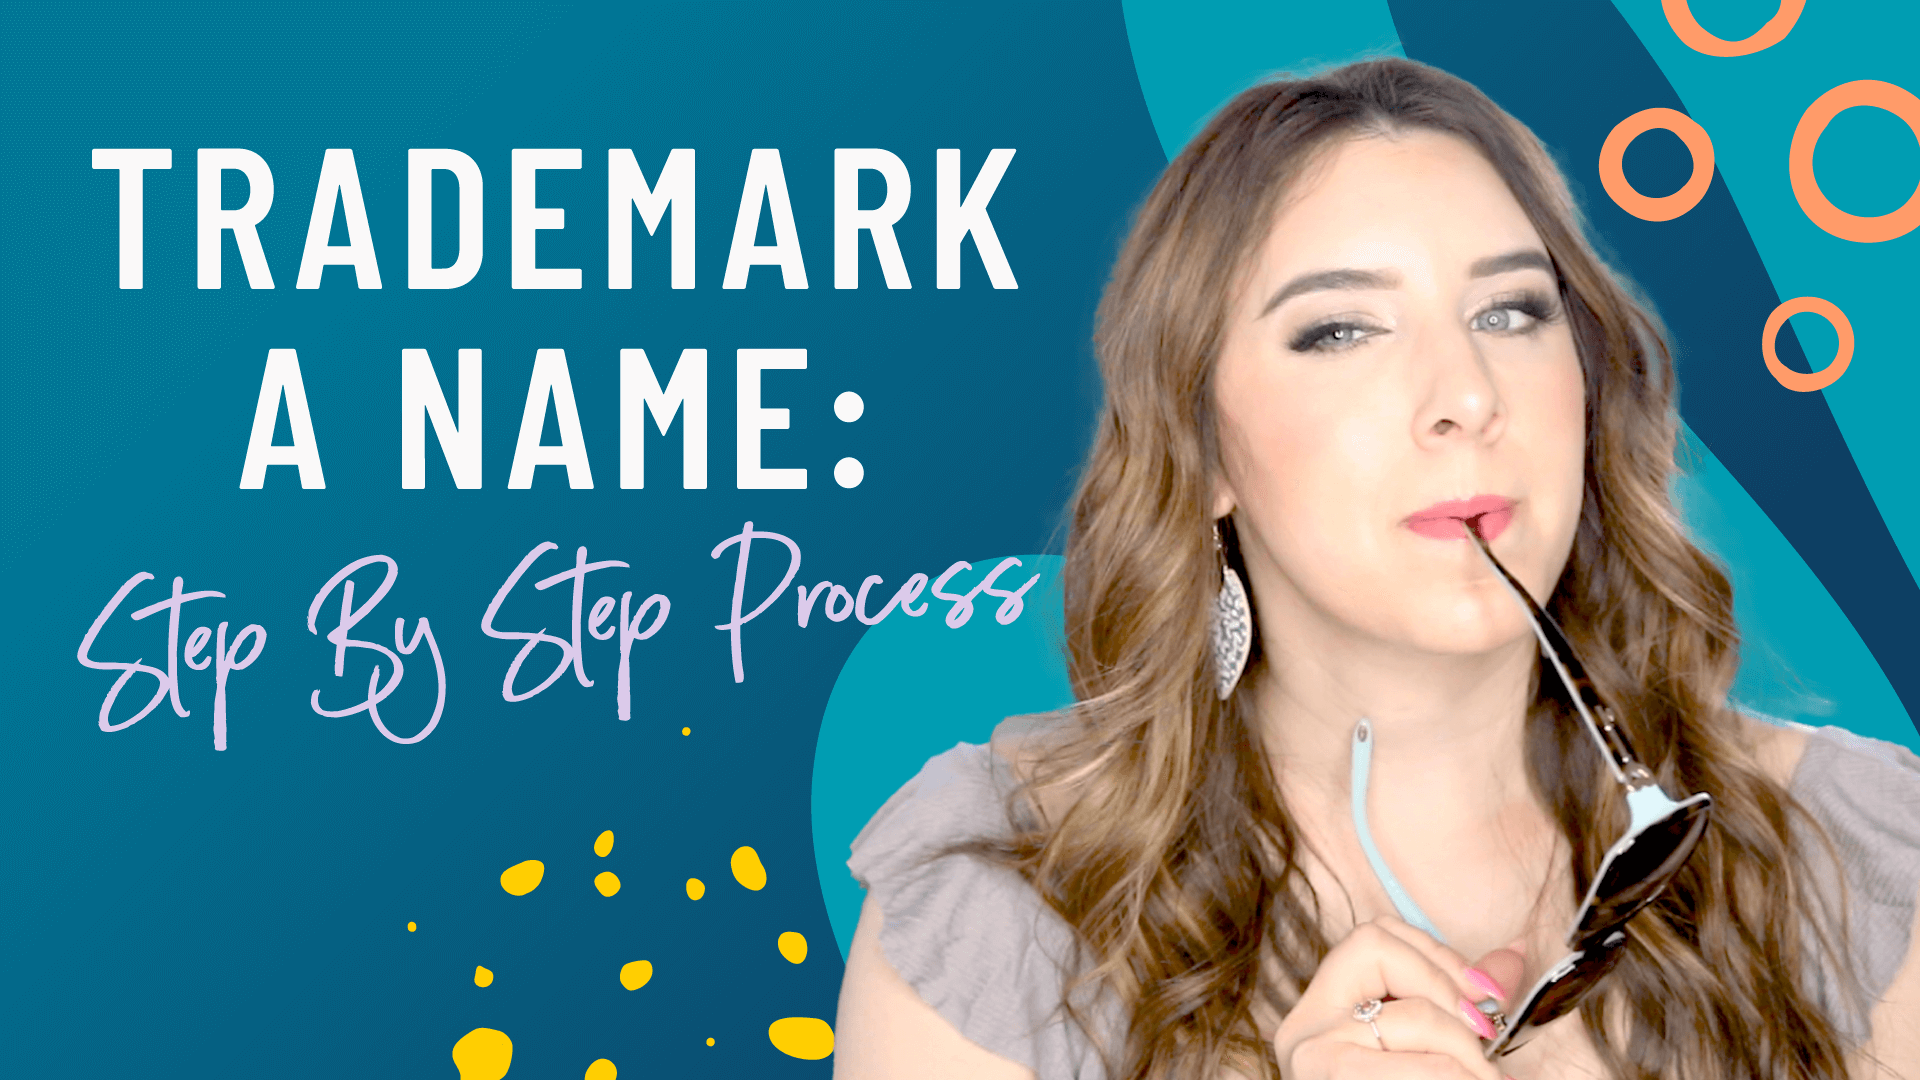 Trademark A Name: Step by Step Process